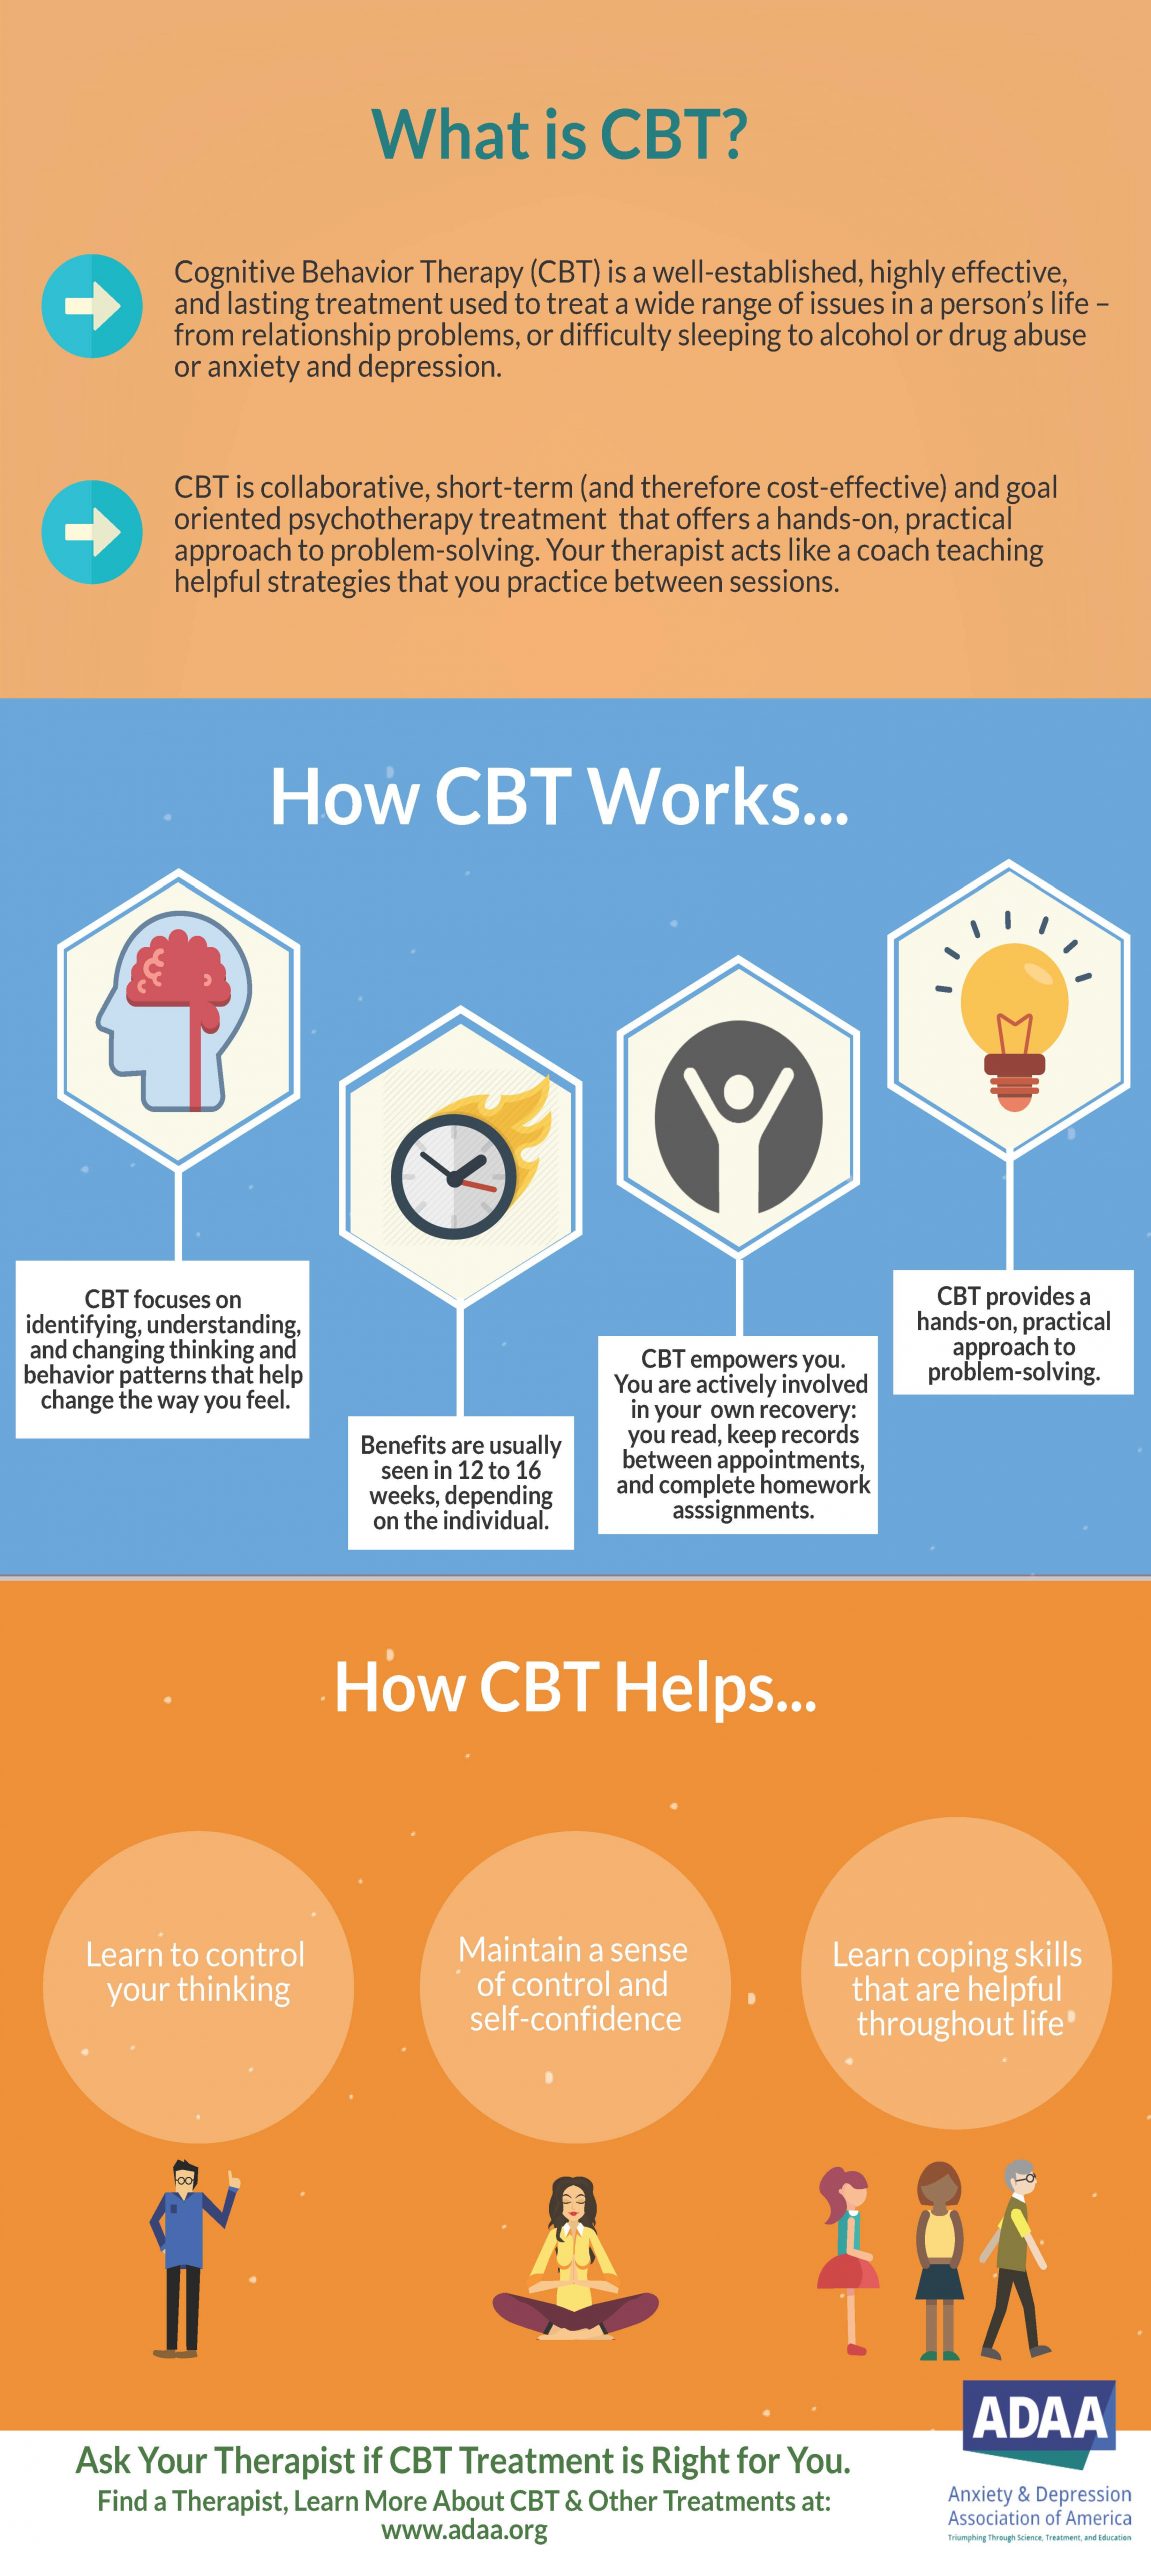 An infographic titled "What Is CBT?" click on the image to be taken to the PDF